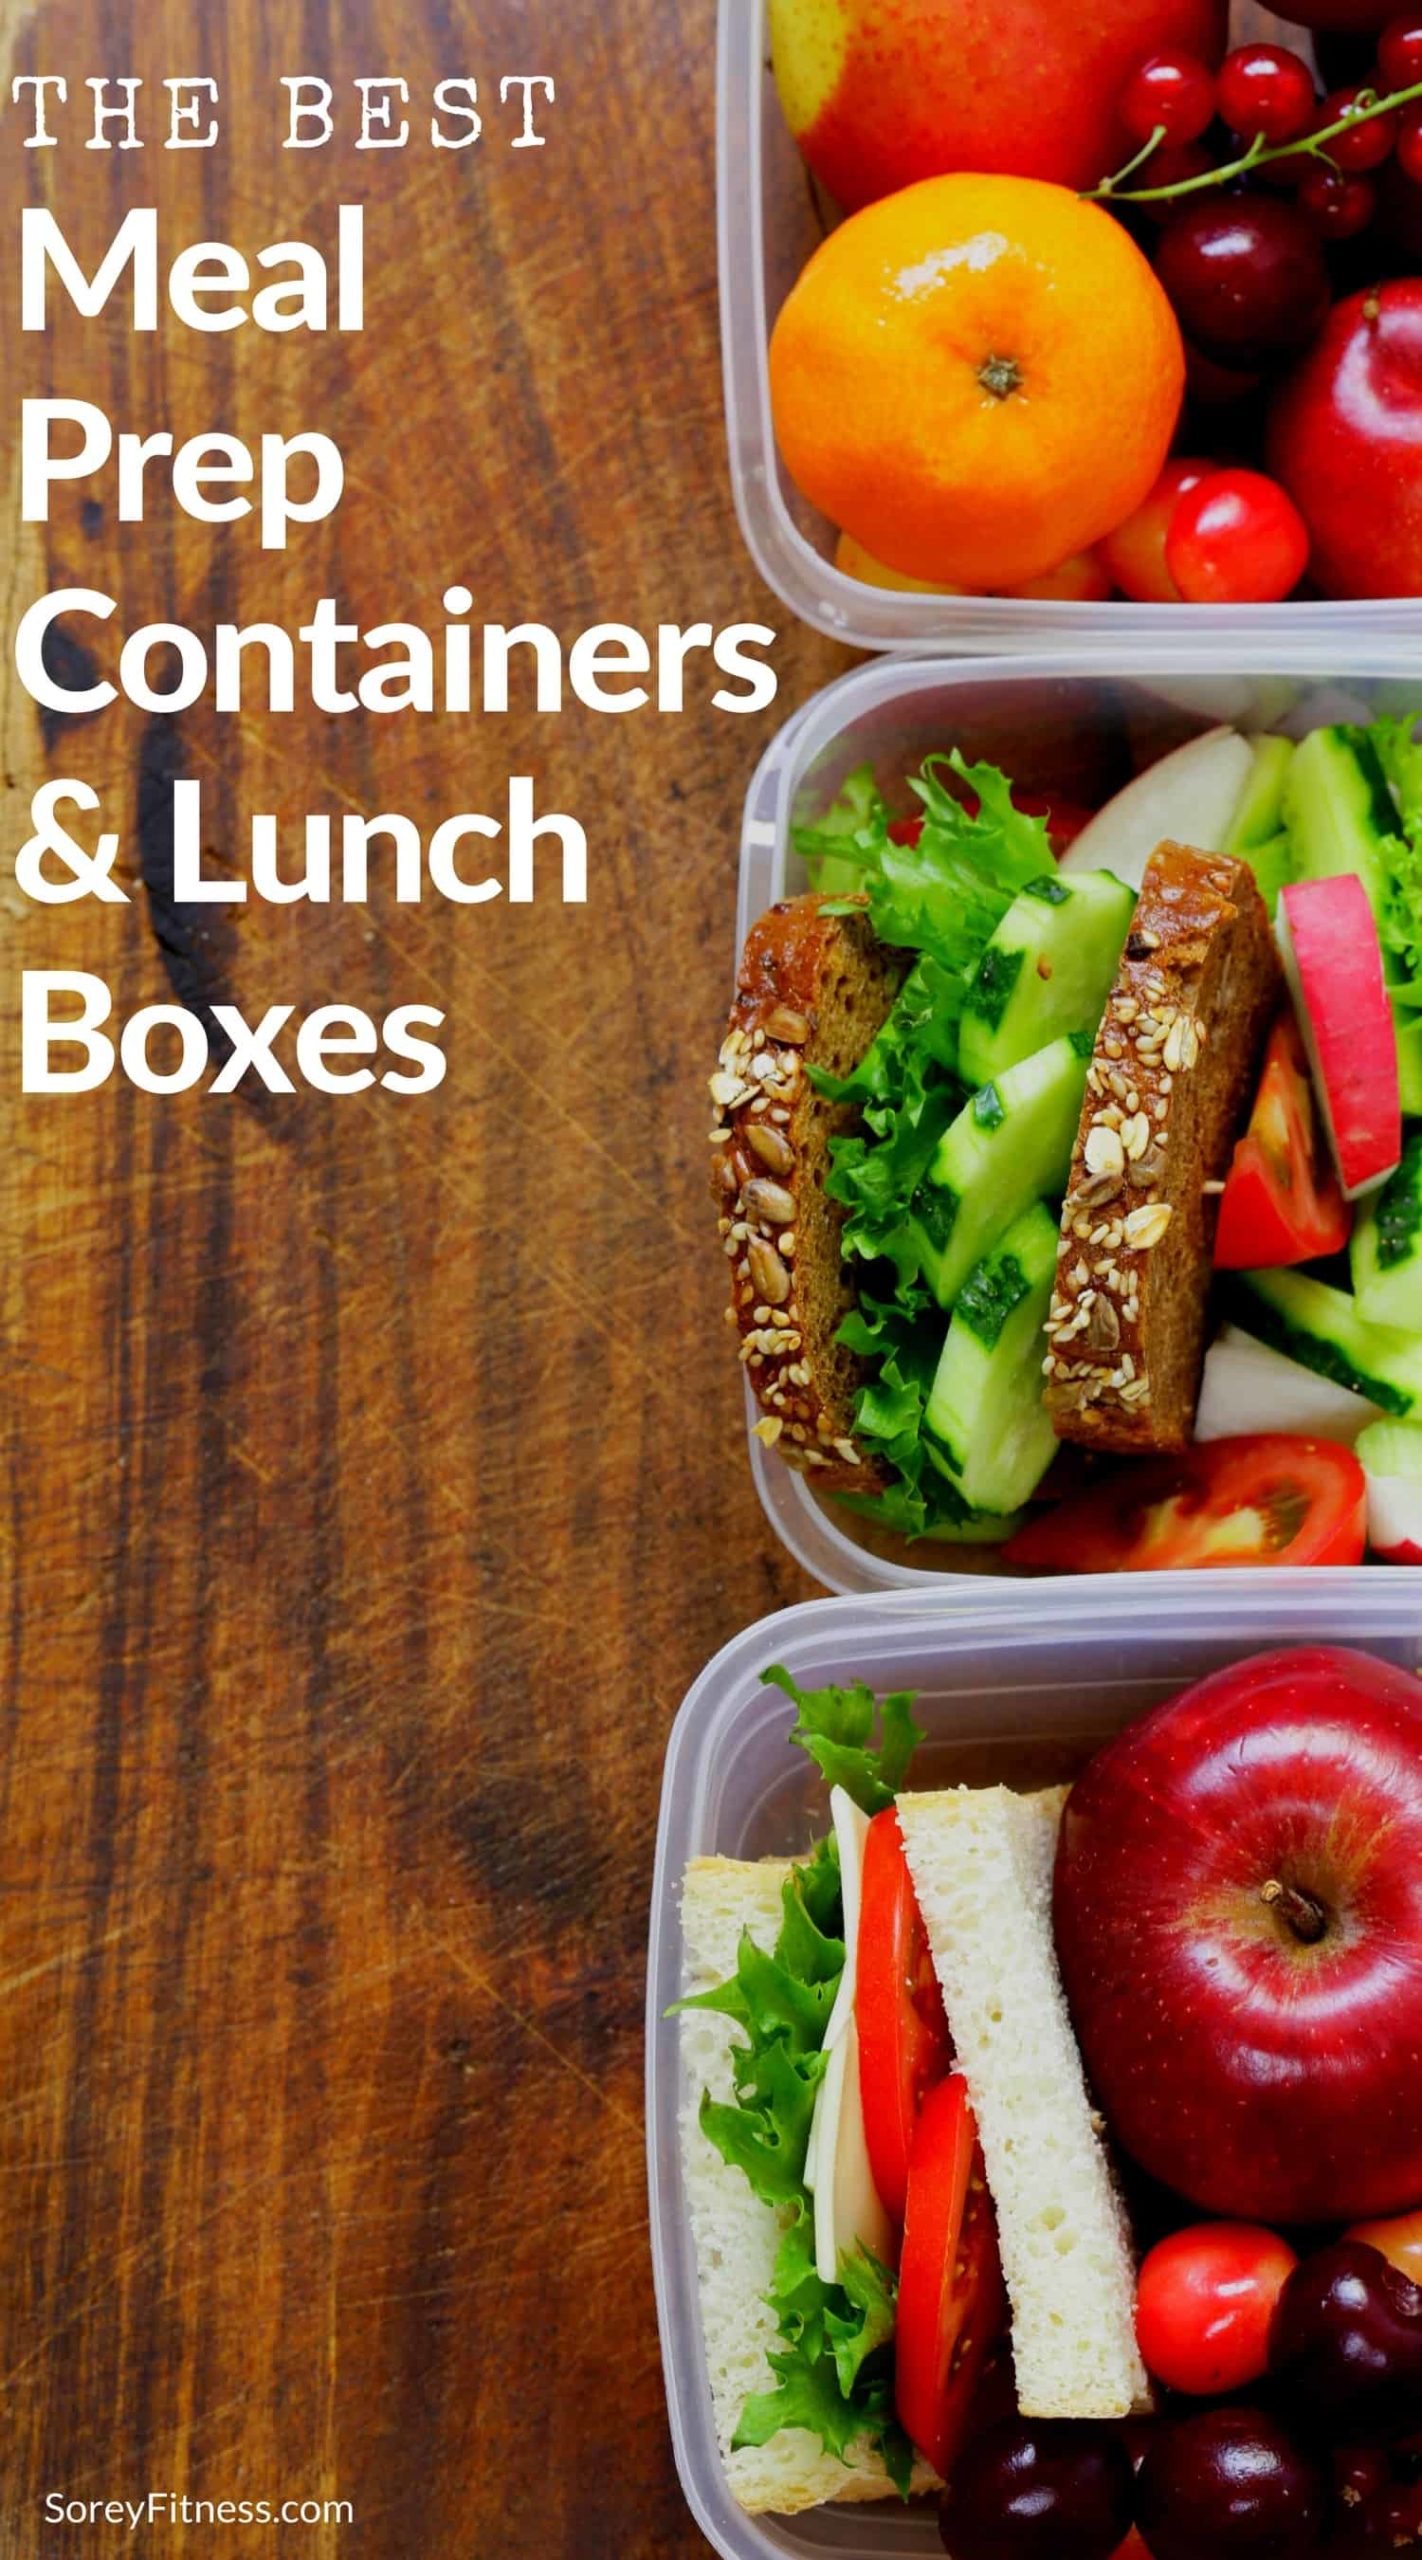 https://soreyfitness.com/wp-content/uploads/2018/04/best-meal-prep-containers-min-scaled.jpg